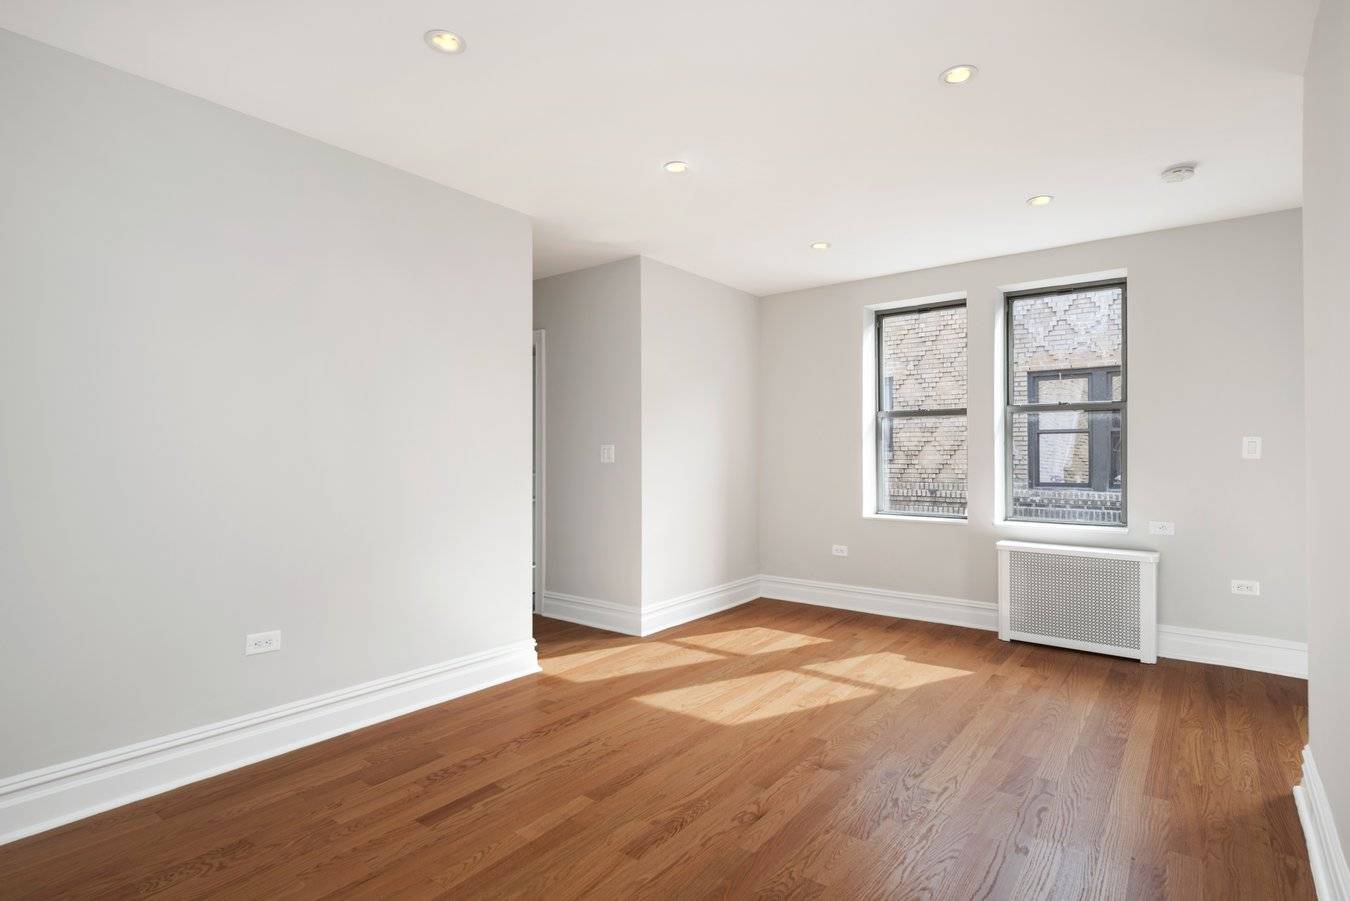 Modern, gut renovated, one bedroom, one bath apartment featuring new oak hardwood floors throughout, a spacious living room, windowed kitchen with Quartz counter tops, beautiful glass tiled backsplash, and stainless ...